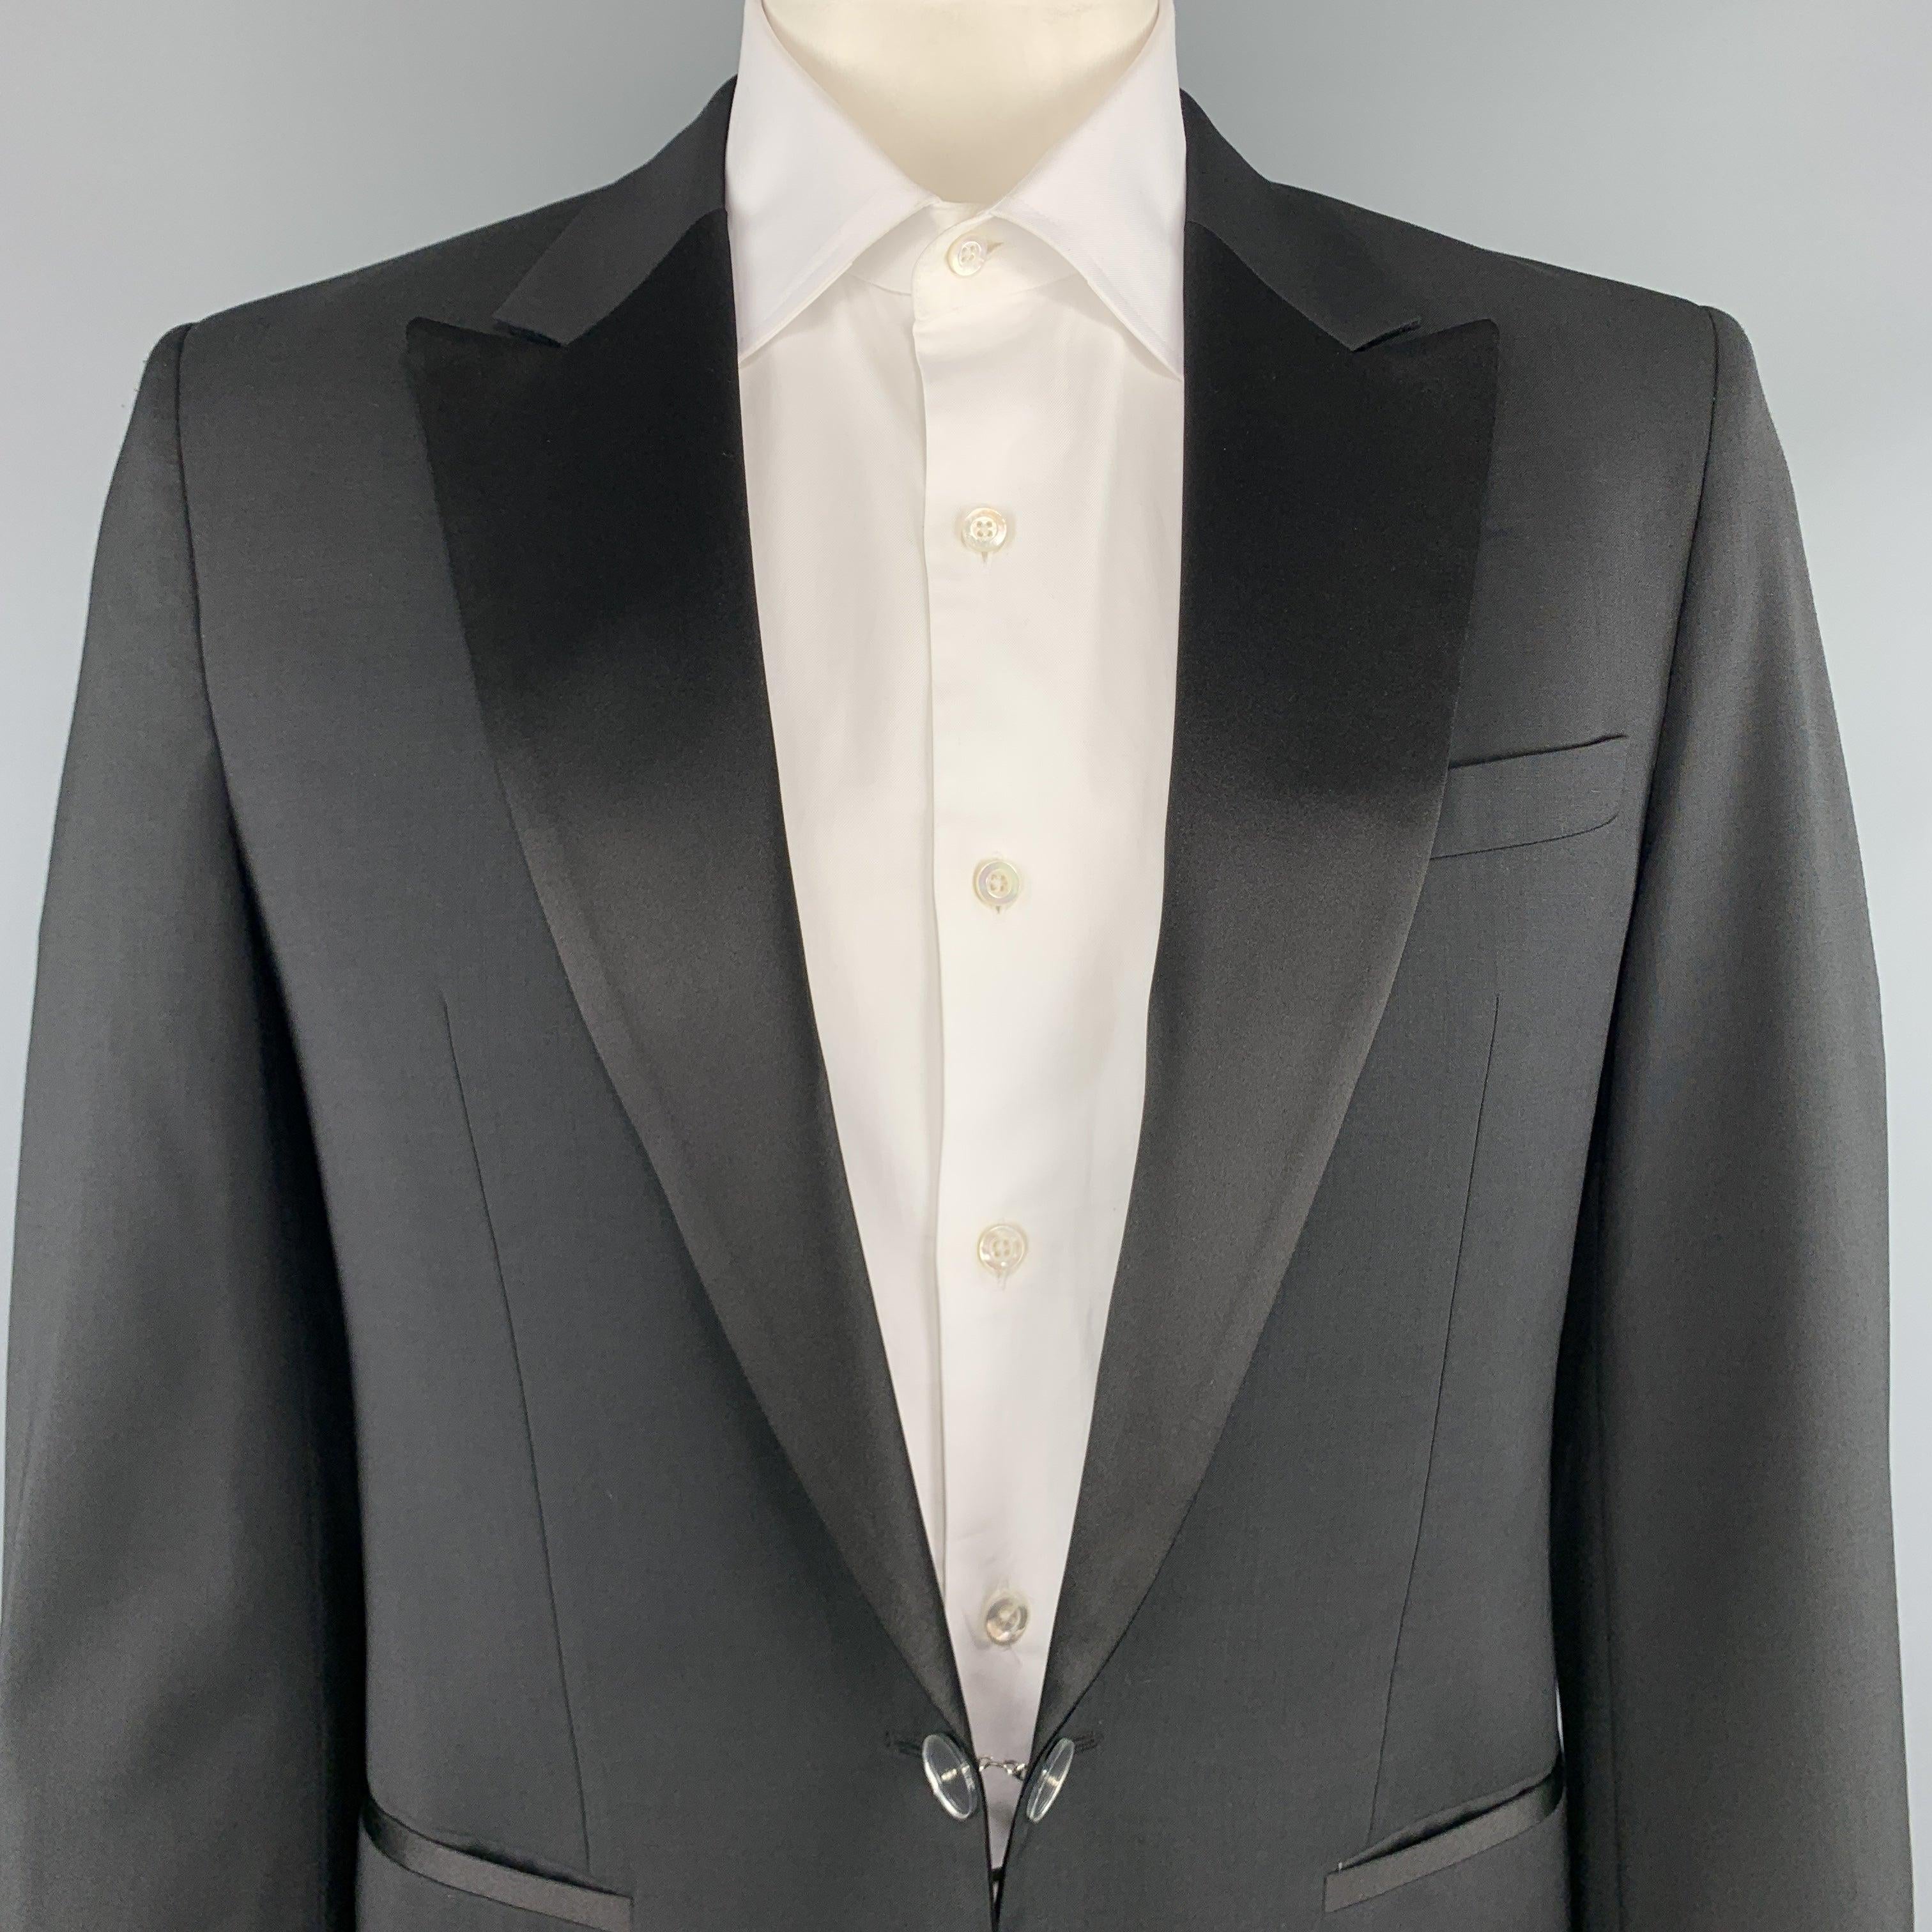 VIKTOR & ROLF single breasted tuxedo sport coat comes in black wool with a satin peak lapel and mirrored single button tab front and functional button cuff sleeves. Very minor wear on buttons. Made in Italy.
Excellent Pre-Owned Condition. 

Marked: 